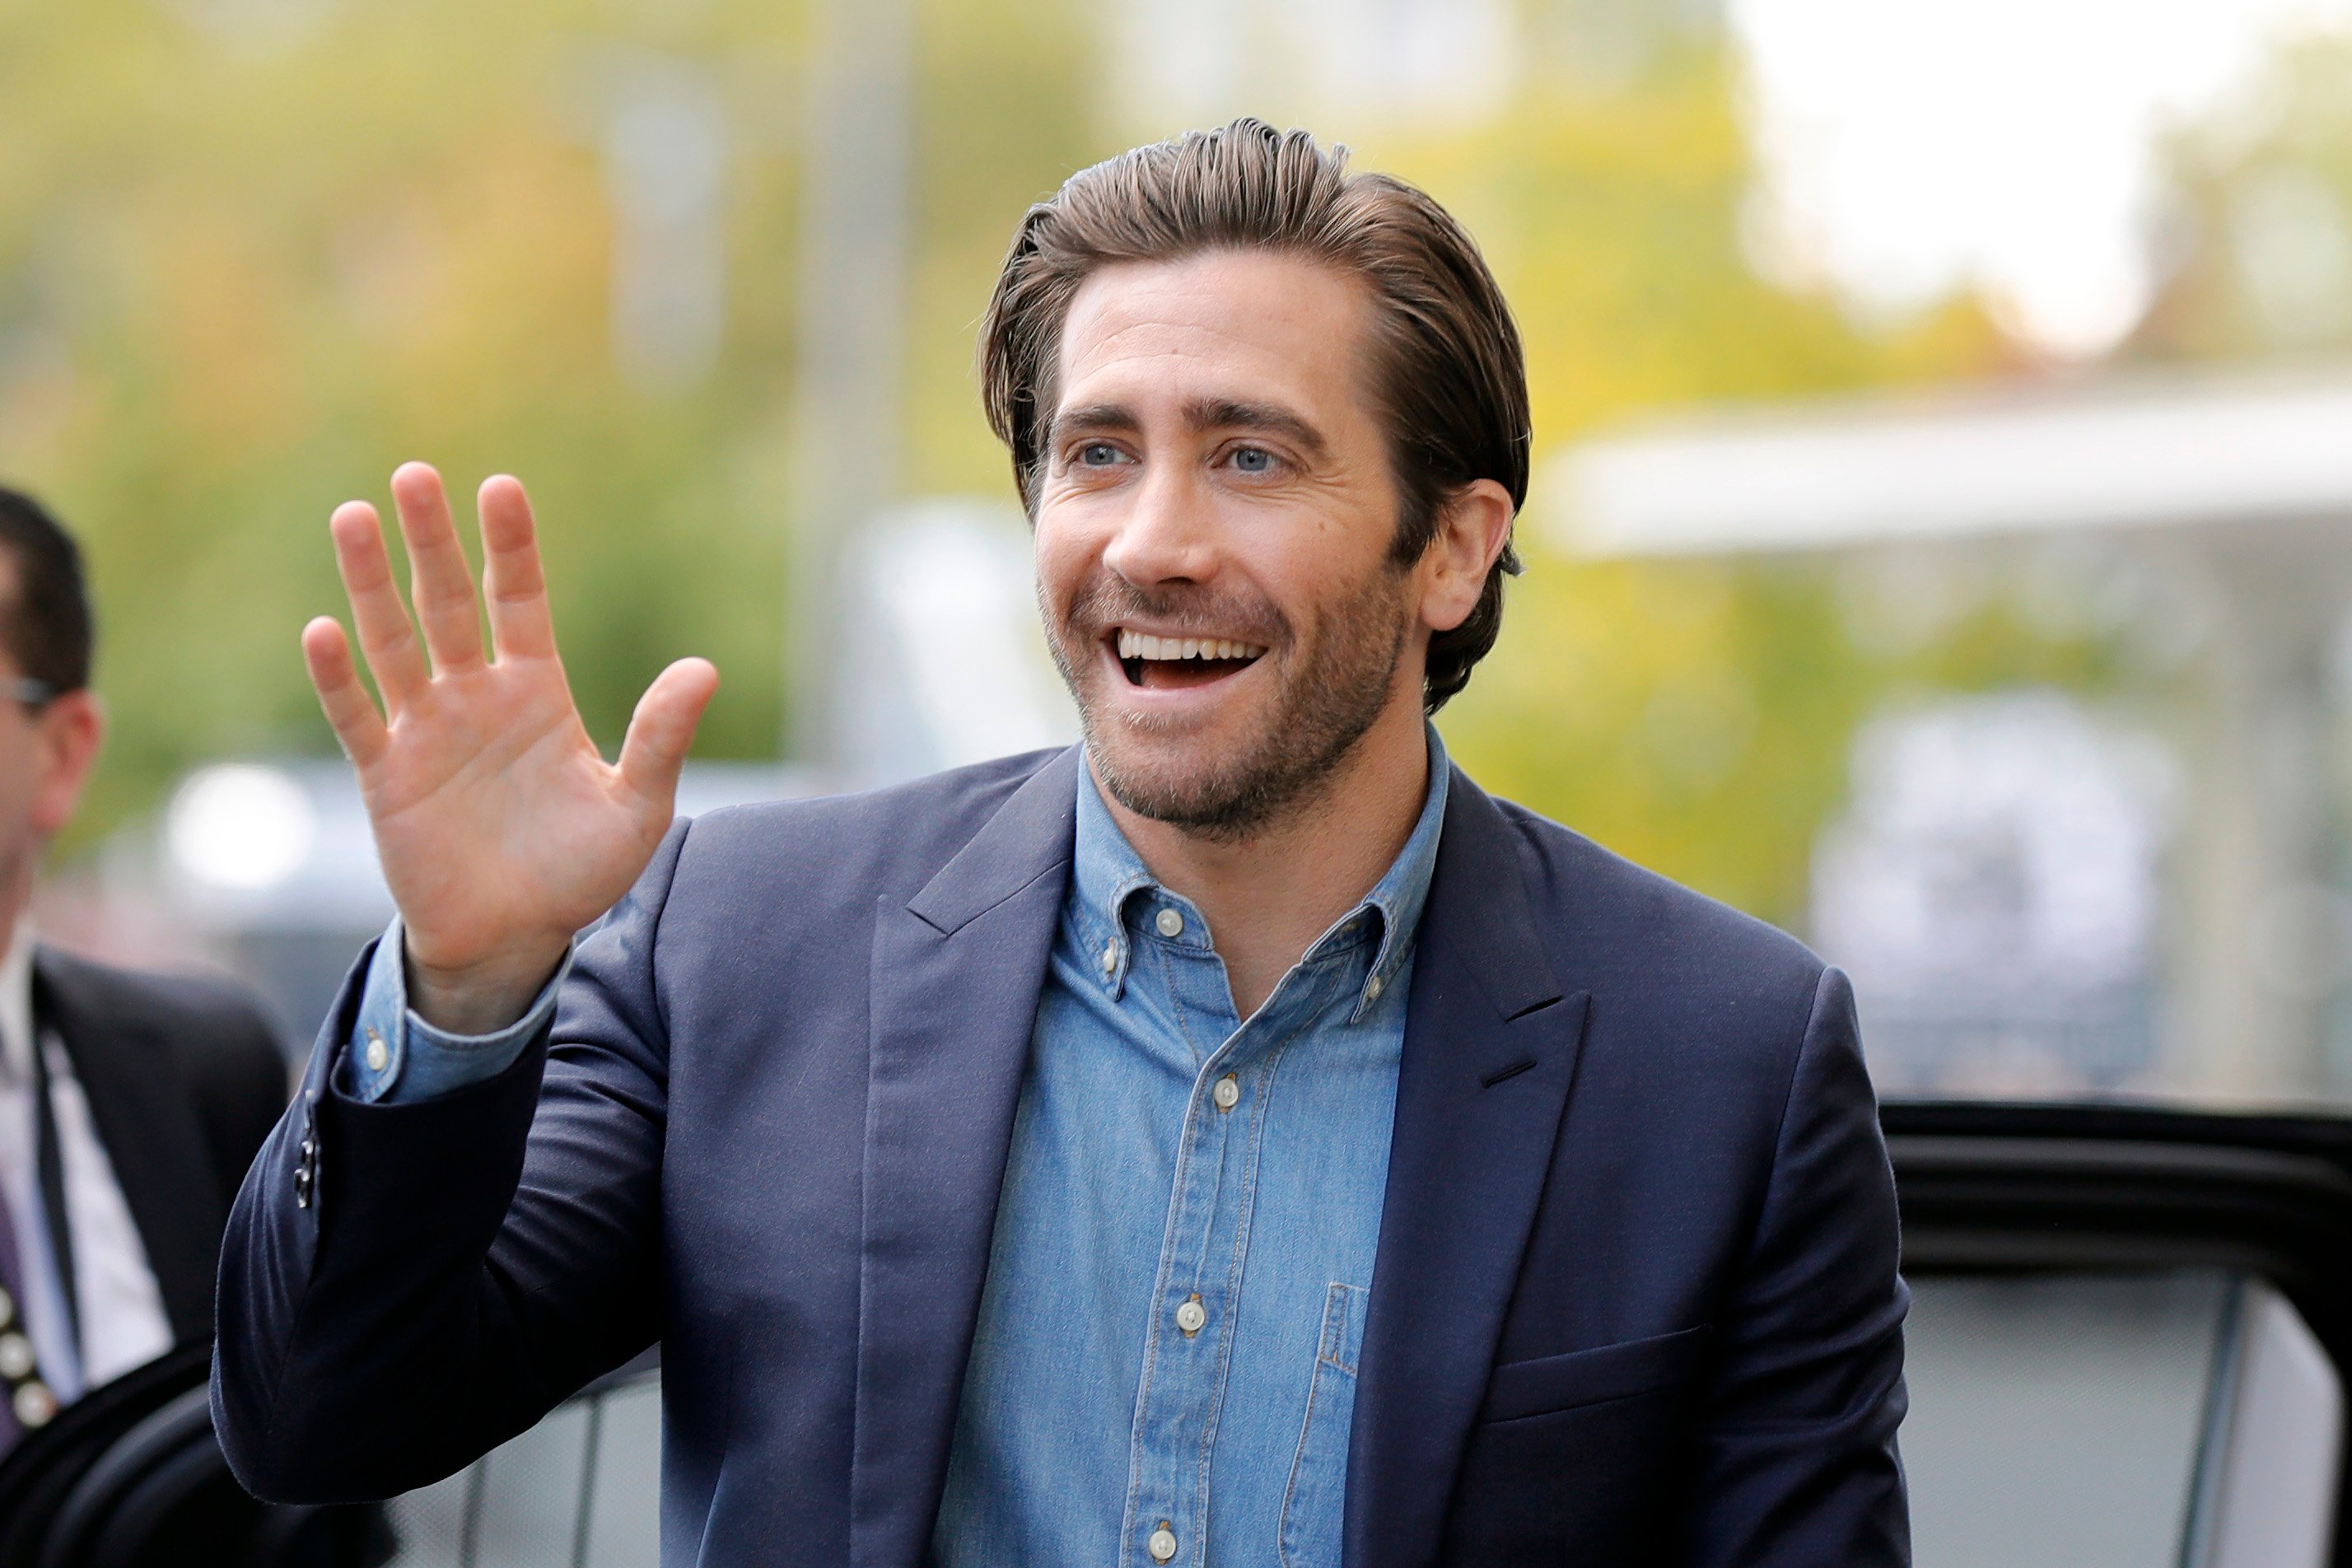 Jake Gyllenhaal waves to the cameras